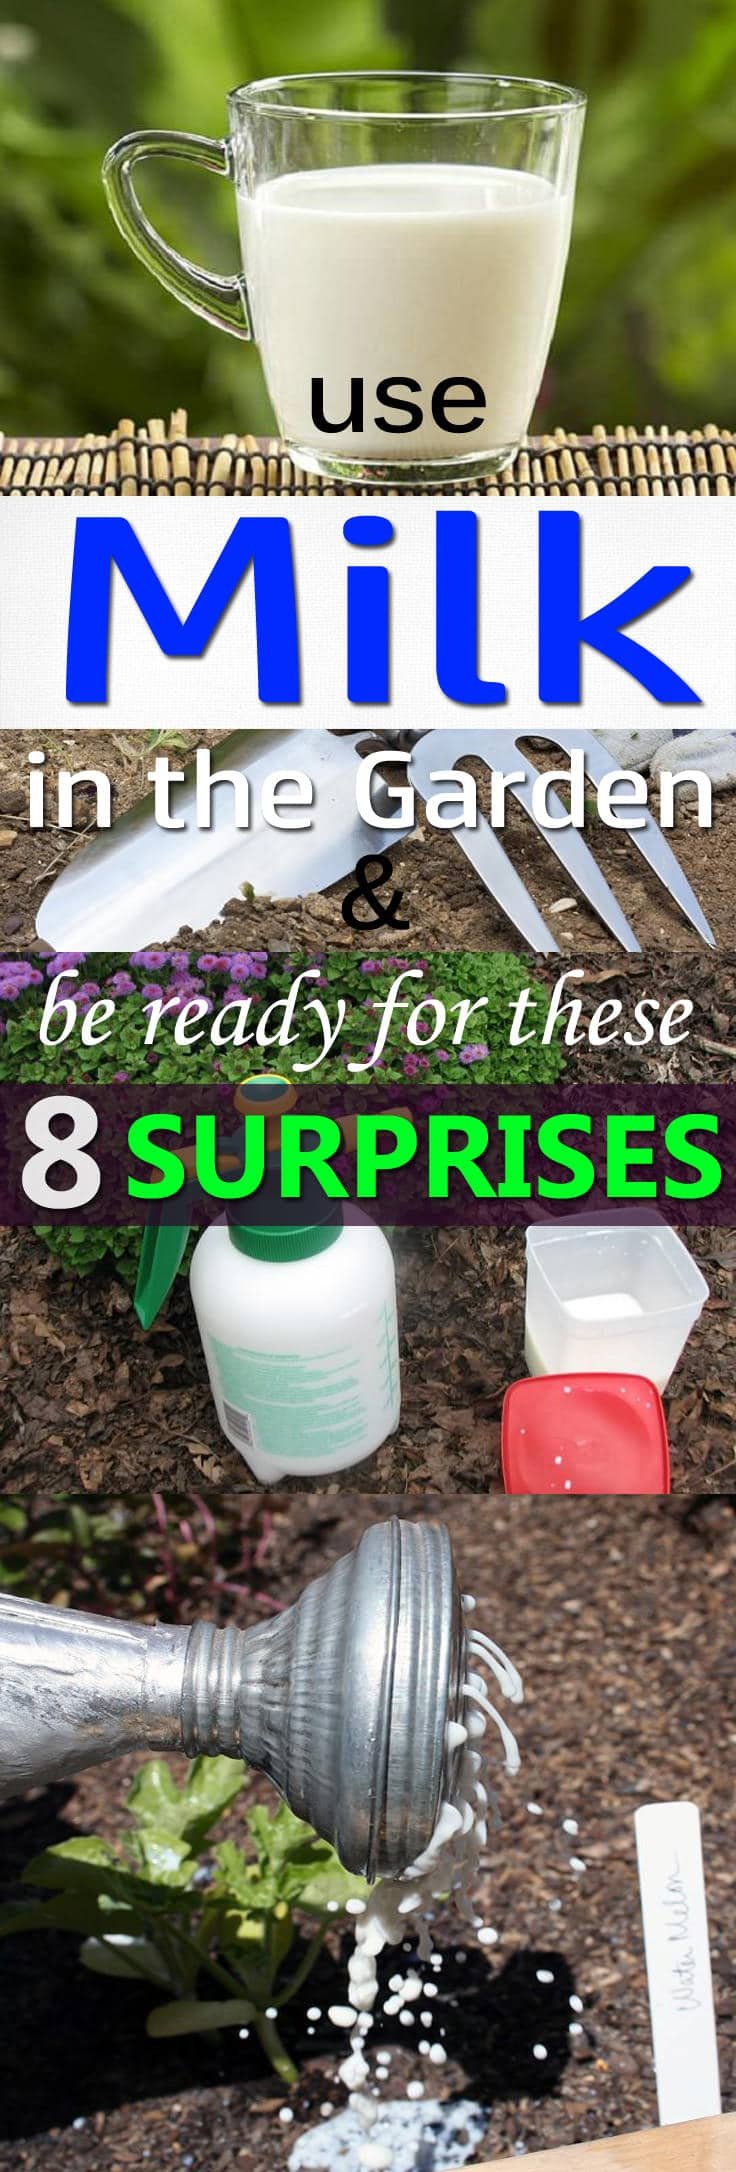 Learn about the 8 amazing milk uses in the garden backed by experiments and research!